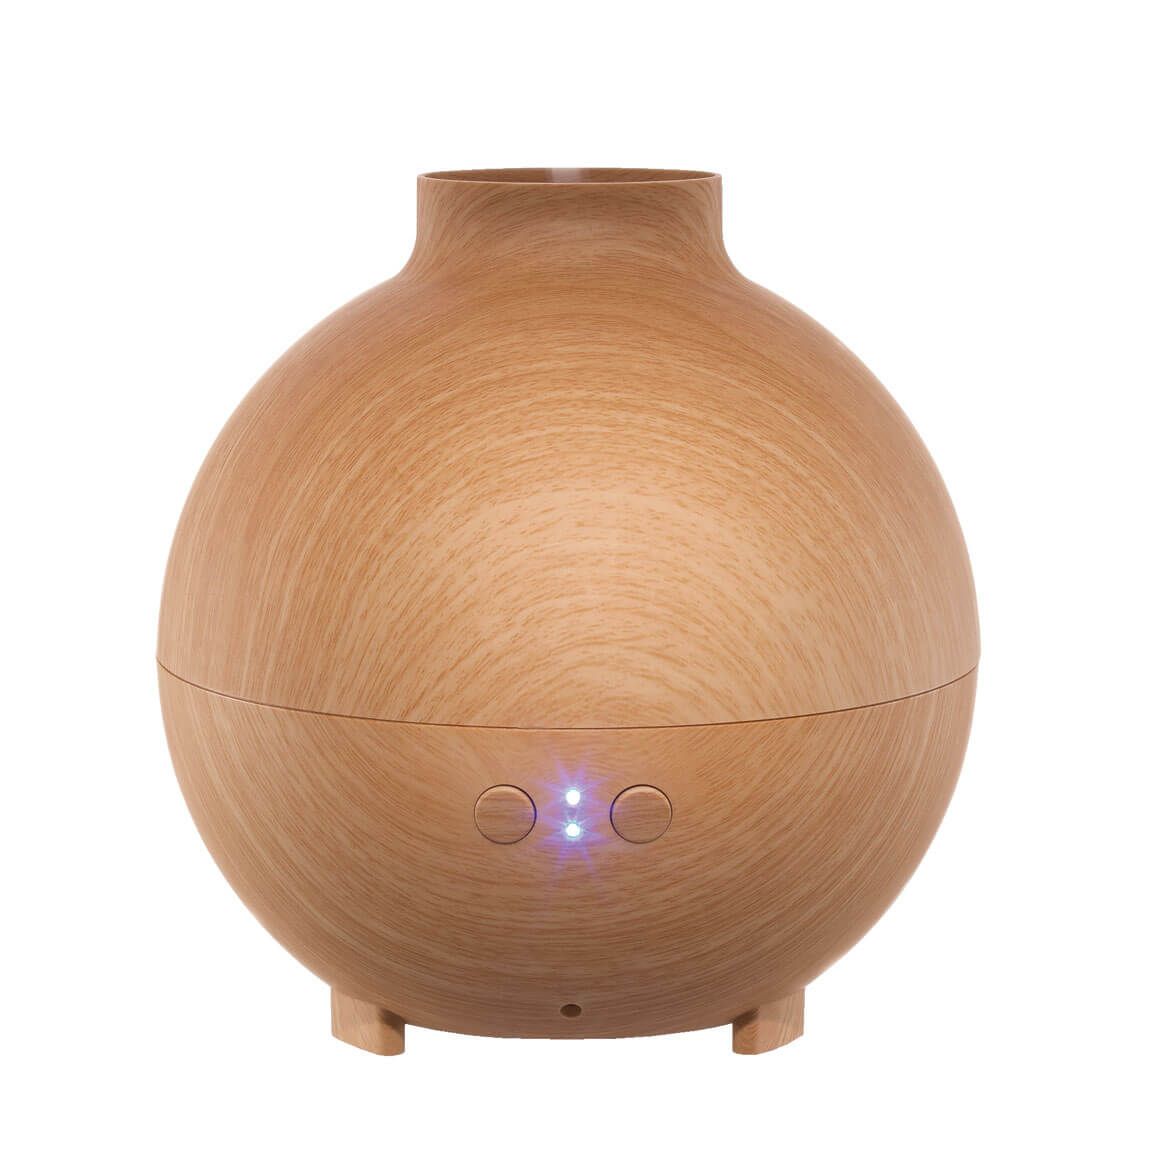 Lighted Oil Diffuser & Humidifier, 600 ml + '-' + 356189